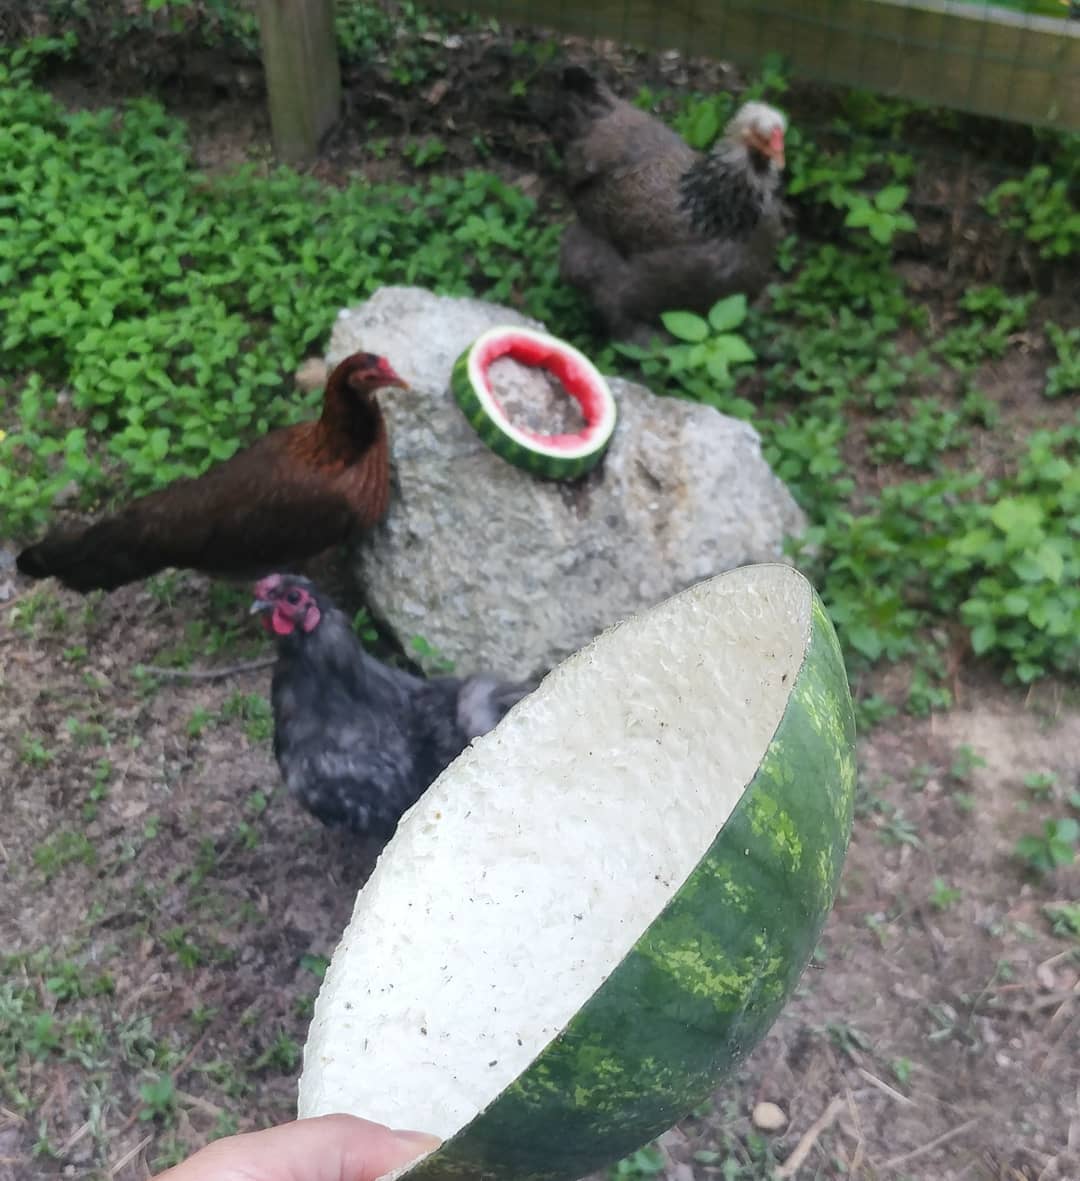 My talented flock created this perfectly hollowed out watermelon bowl today and are currently working on a coordinating loop. If you're interested, all of their beak-crafted work will be available on their Etsy shop. (Just kidding! It will be in the compost pile.)